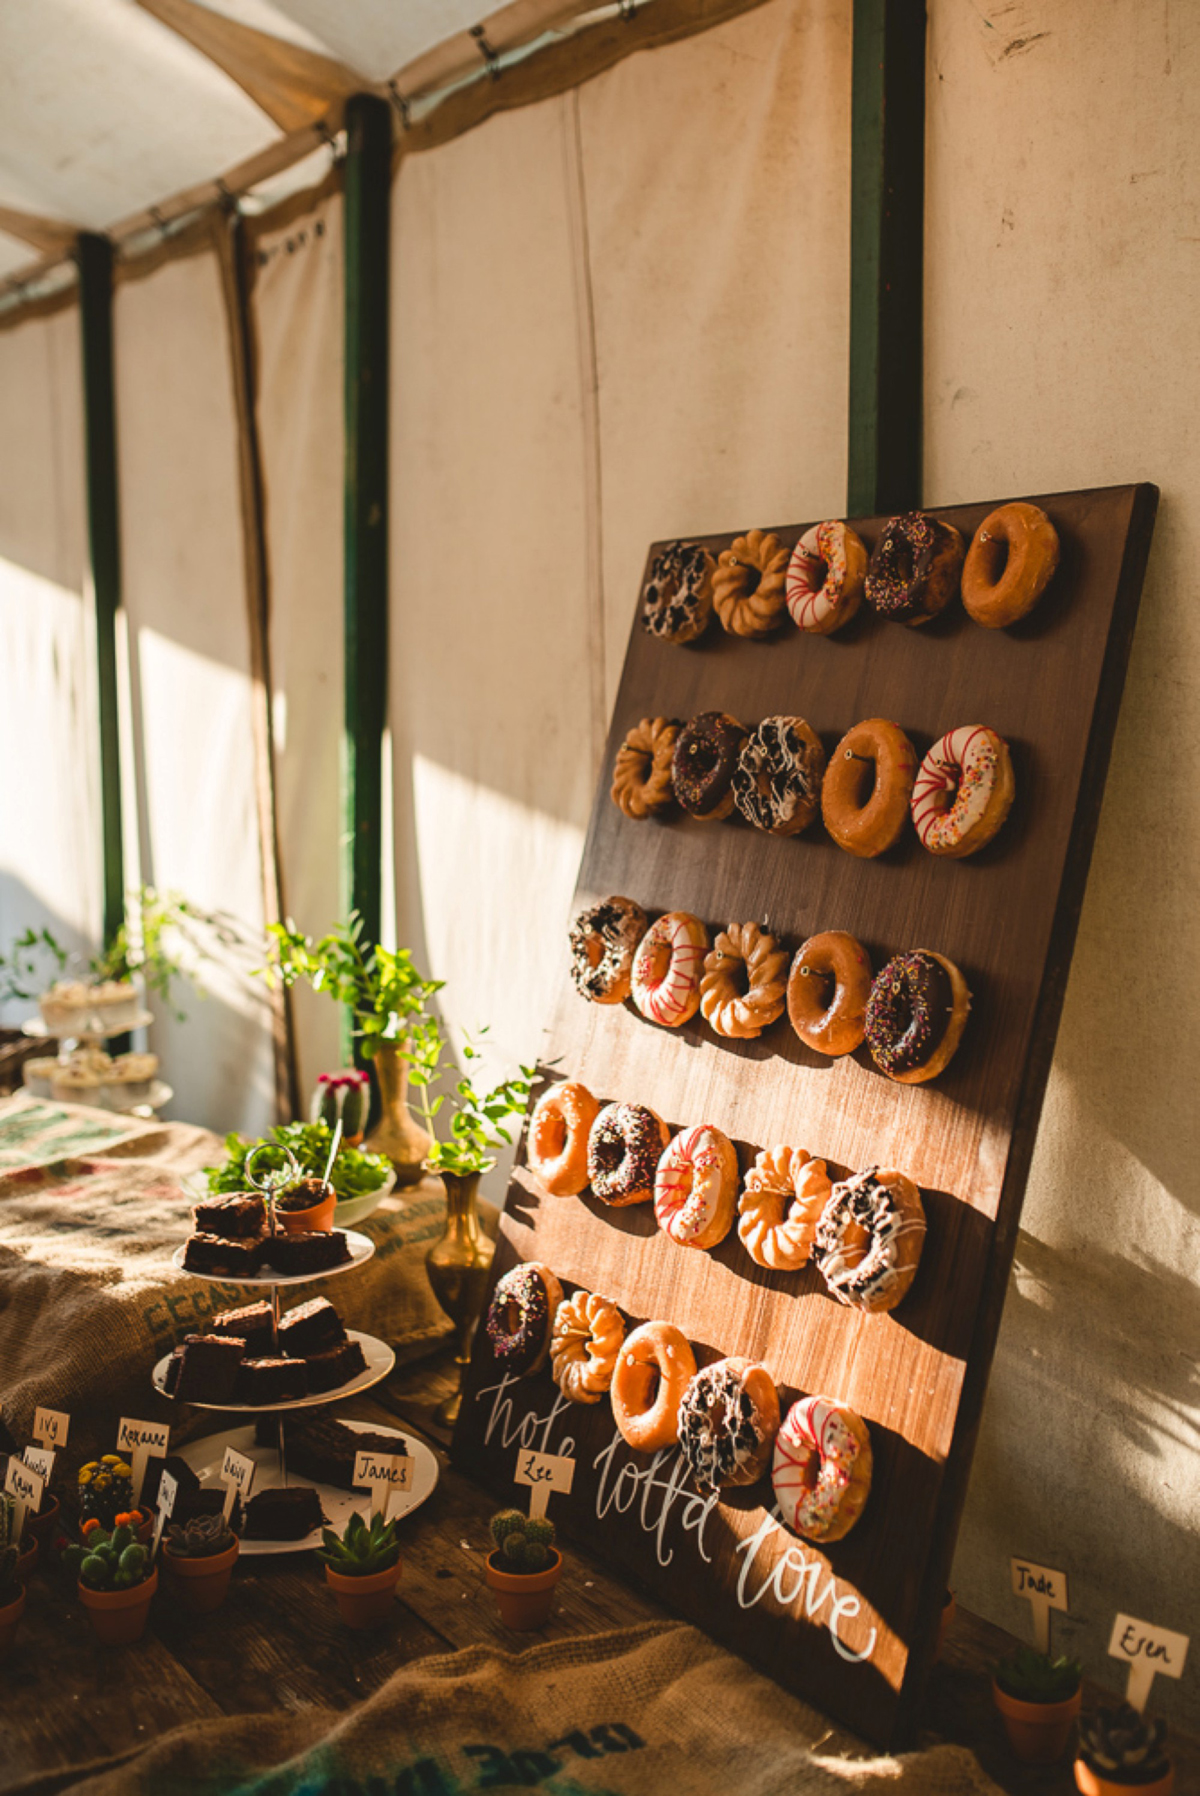 76 Doughnut Wall. Images by Gina Manning